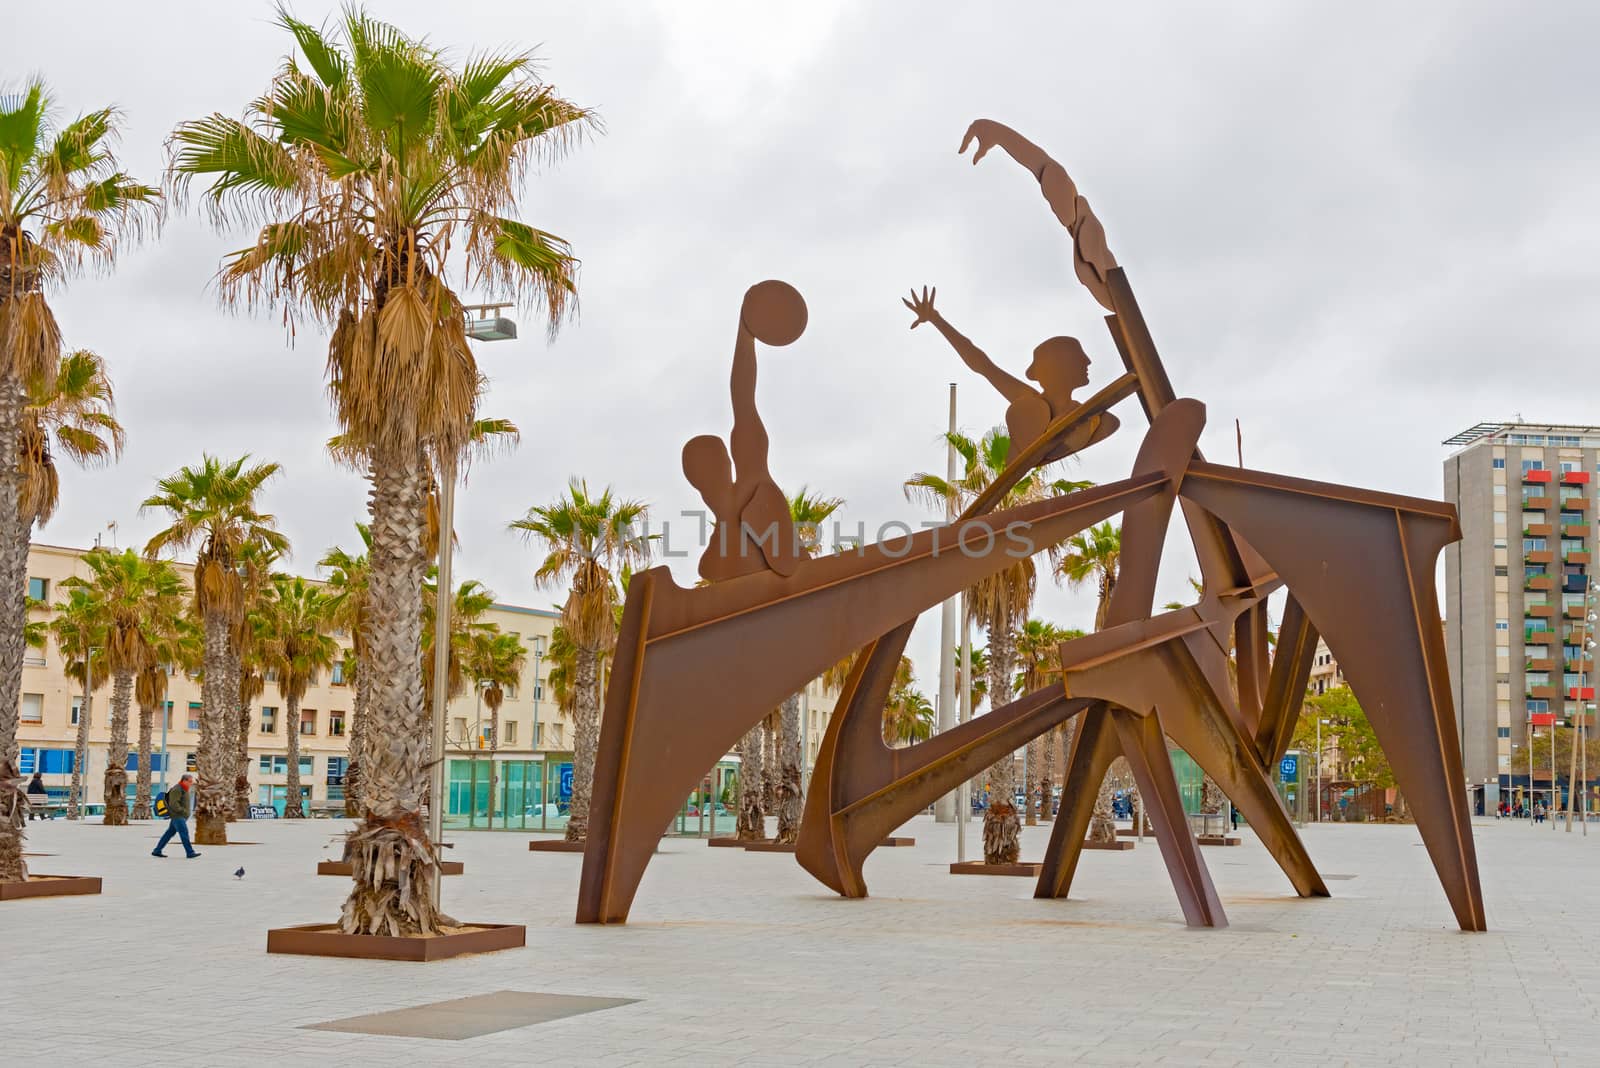 Olympic sulpture Barcelona, Spain by Marcus